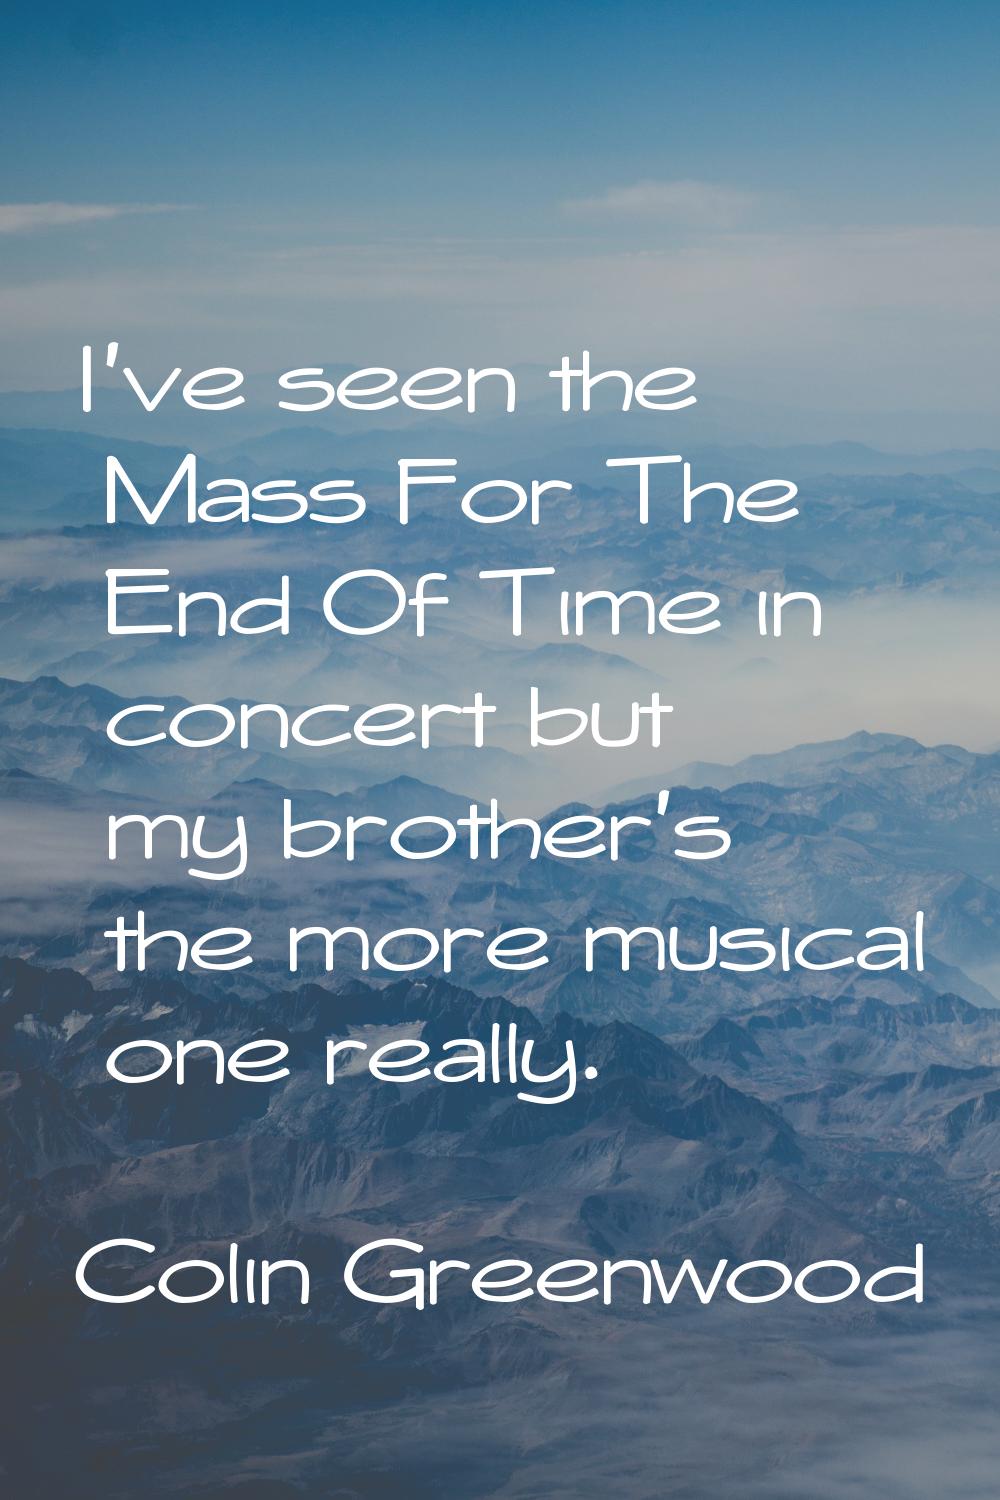 I've seen the Mass For The End Of Time in concert but my brother's the more musical one really.